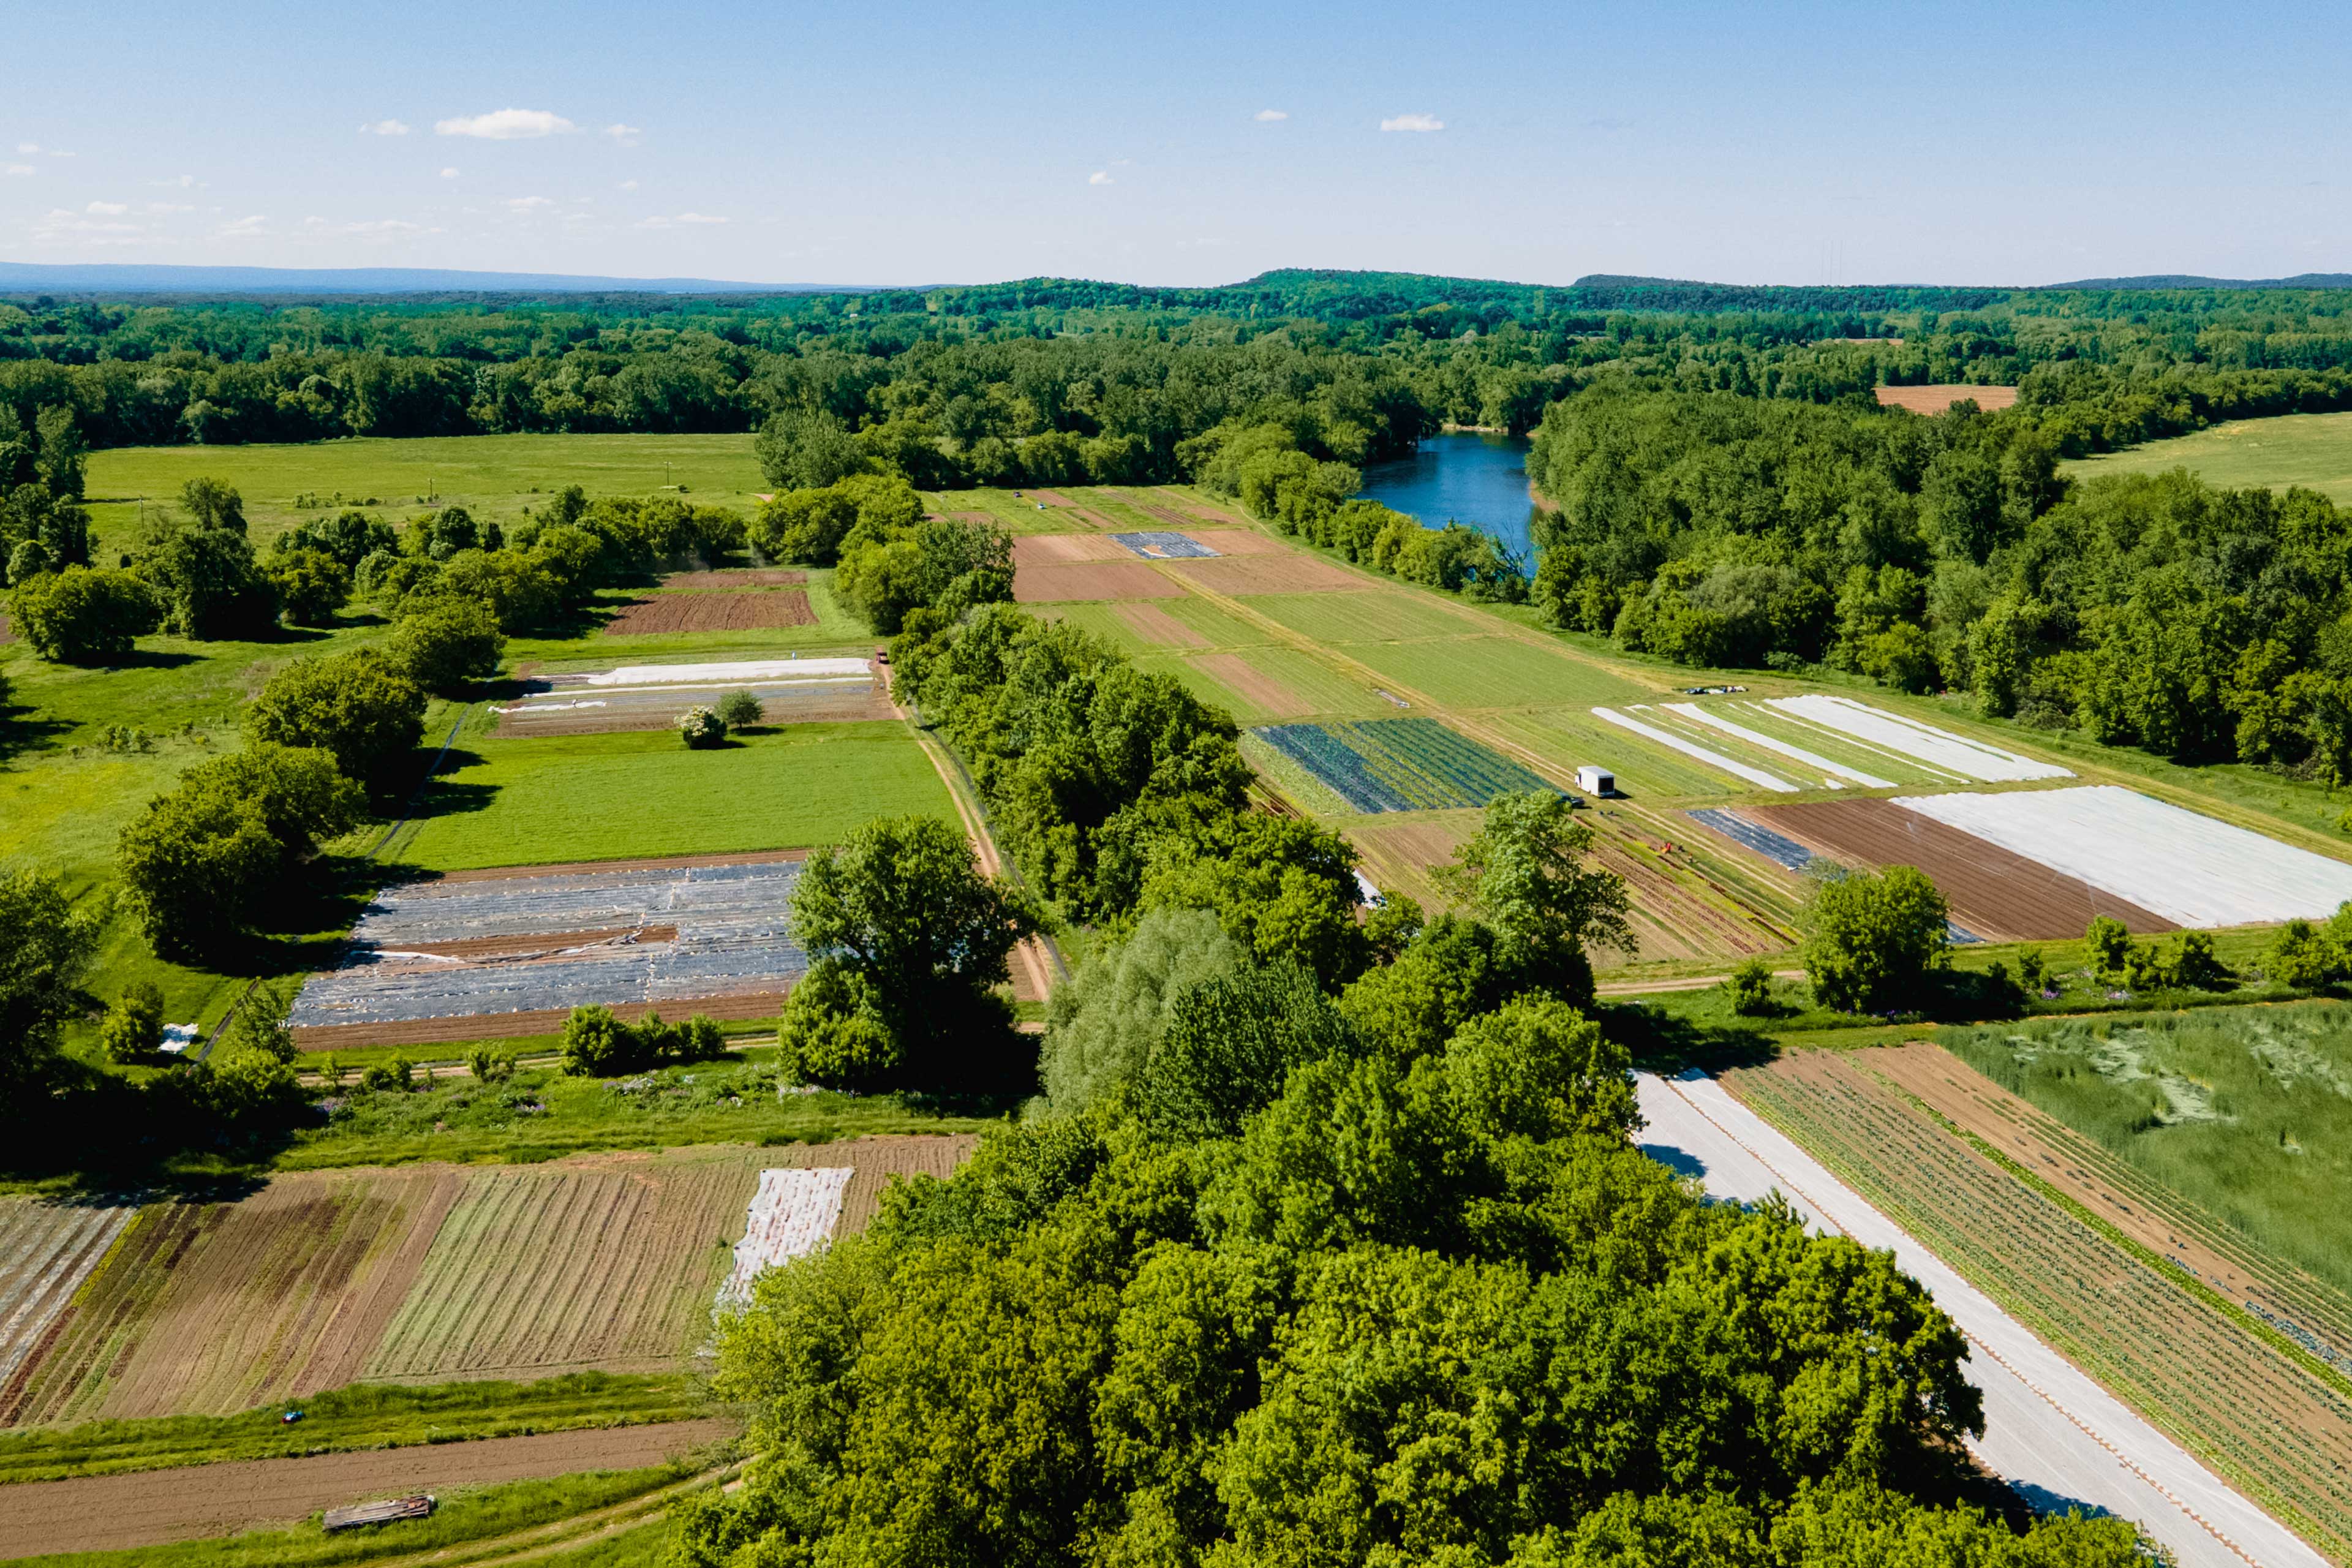 Intervale Community Farm and Digger's Mirth Collective Farm as seen from the air